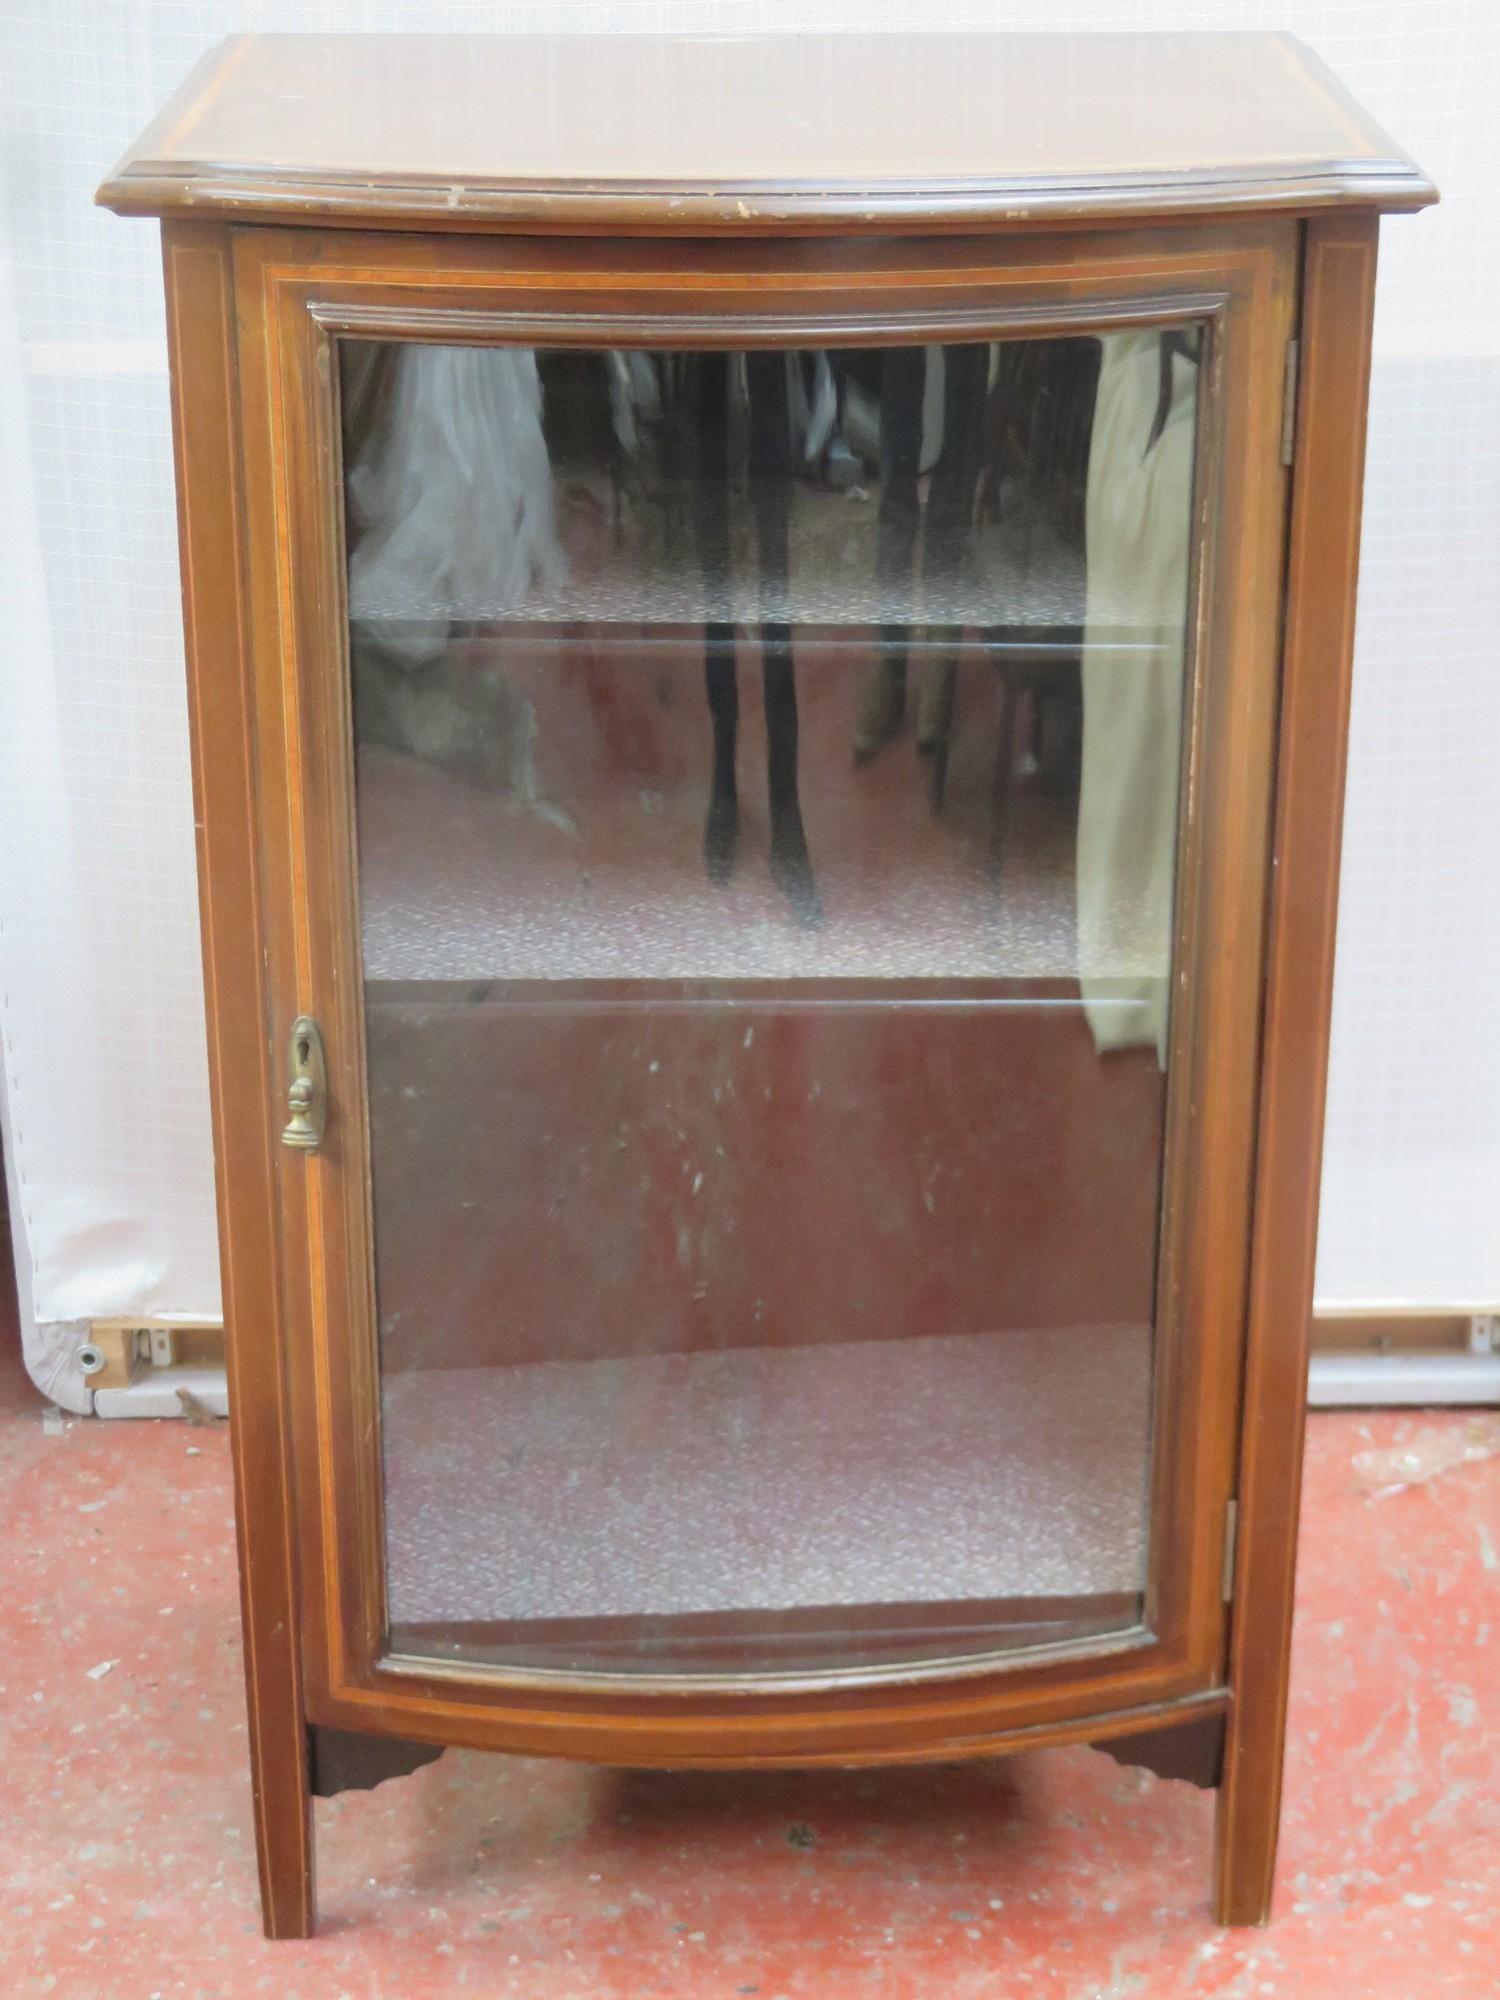 Inlaid mahogany bow fronted single door display cabinet. Approx. 84.5cm H x 54cm W x 14.5cm D